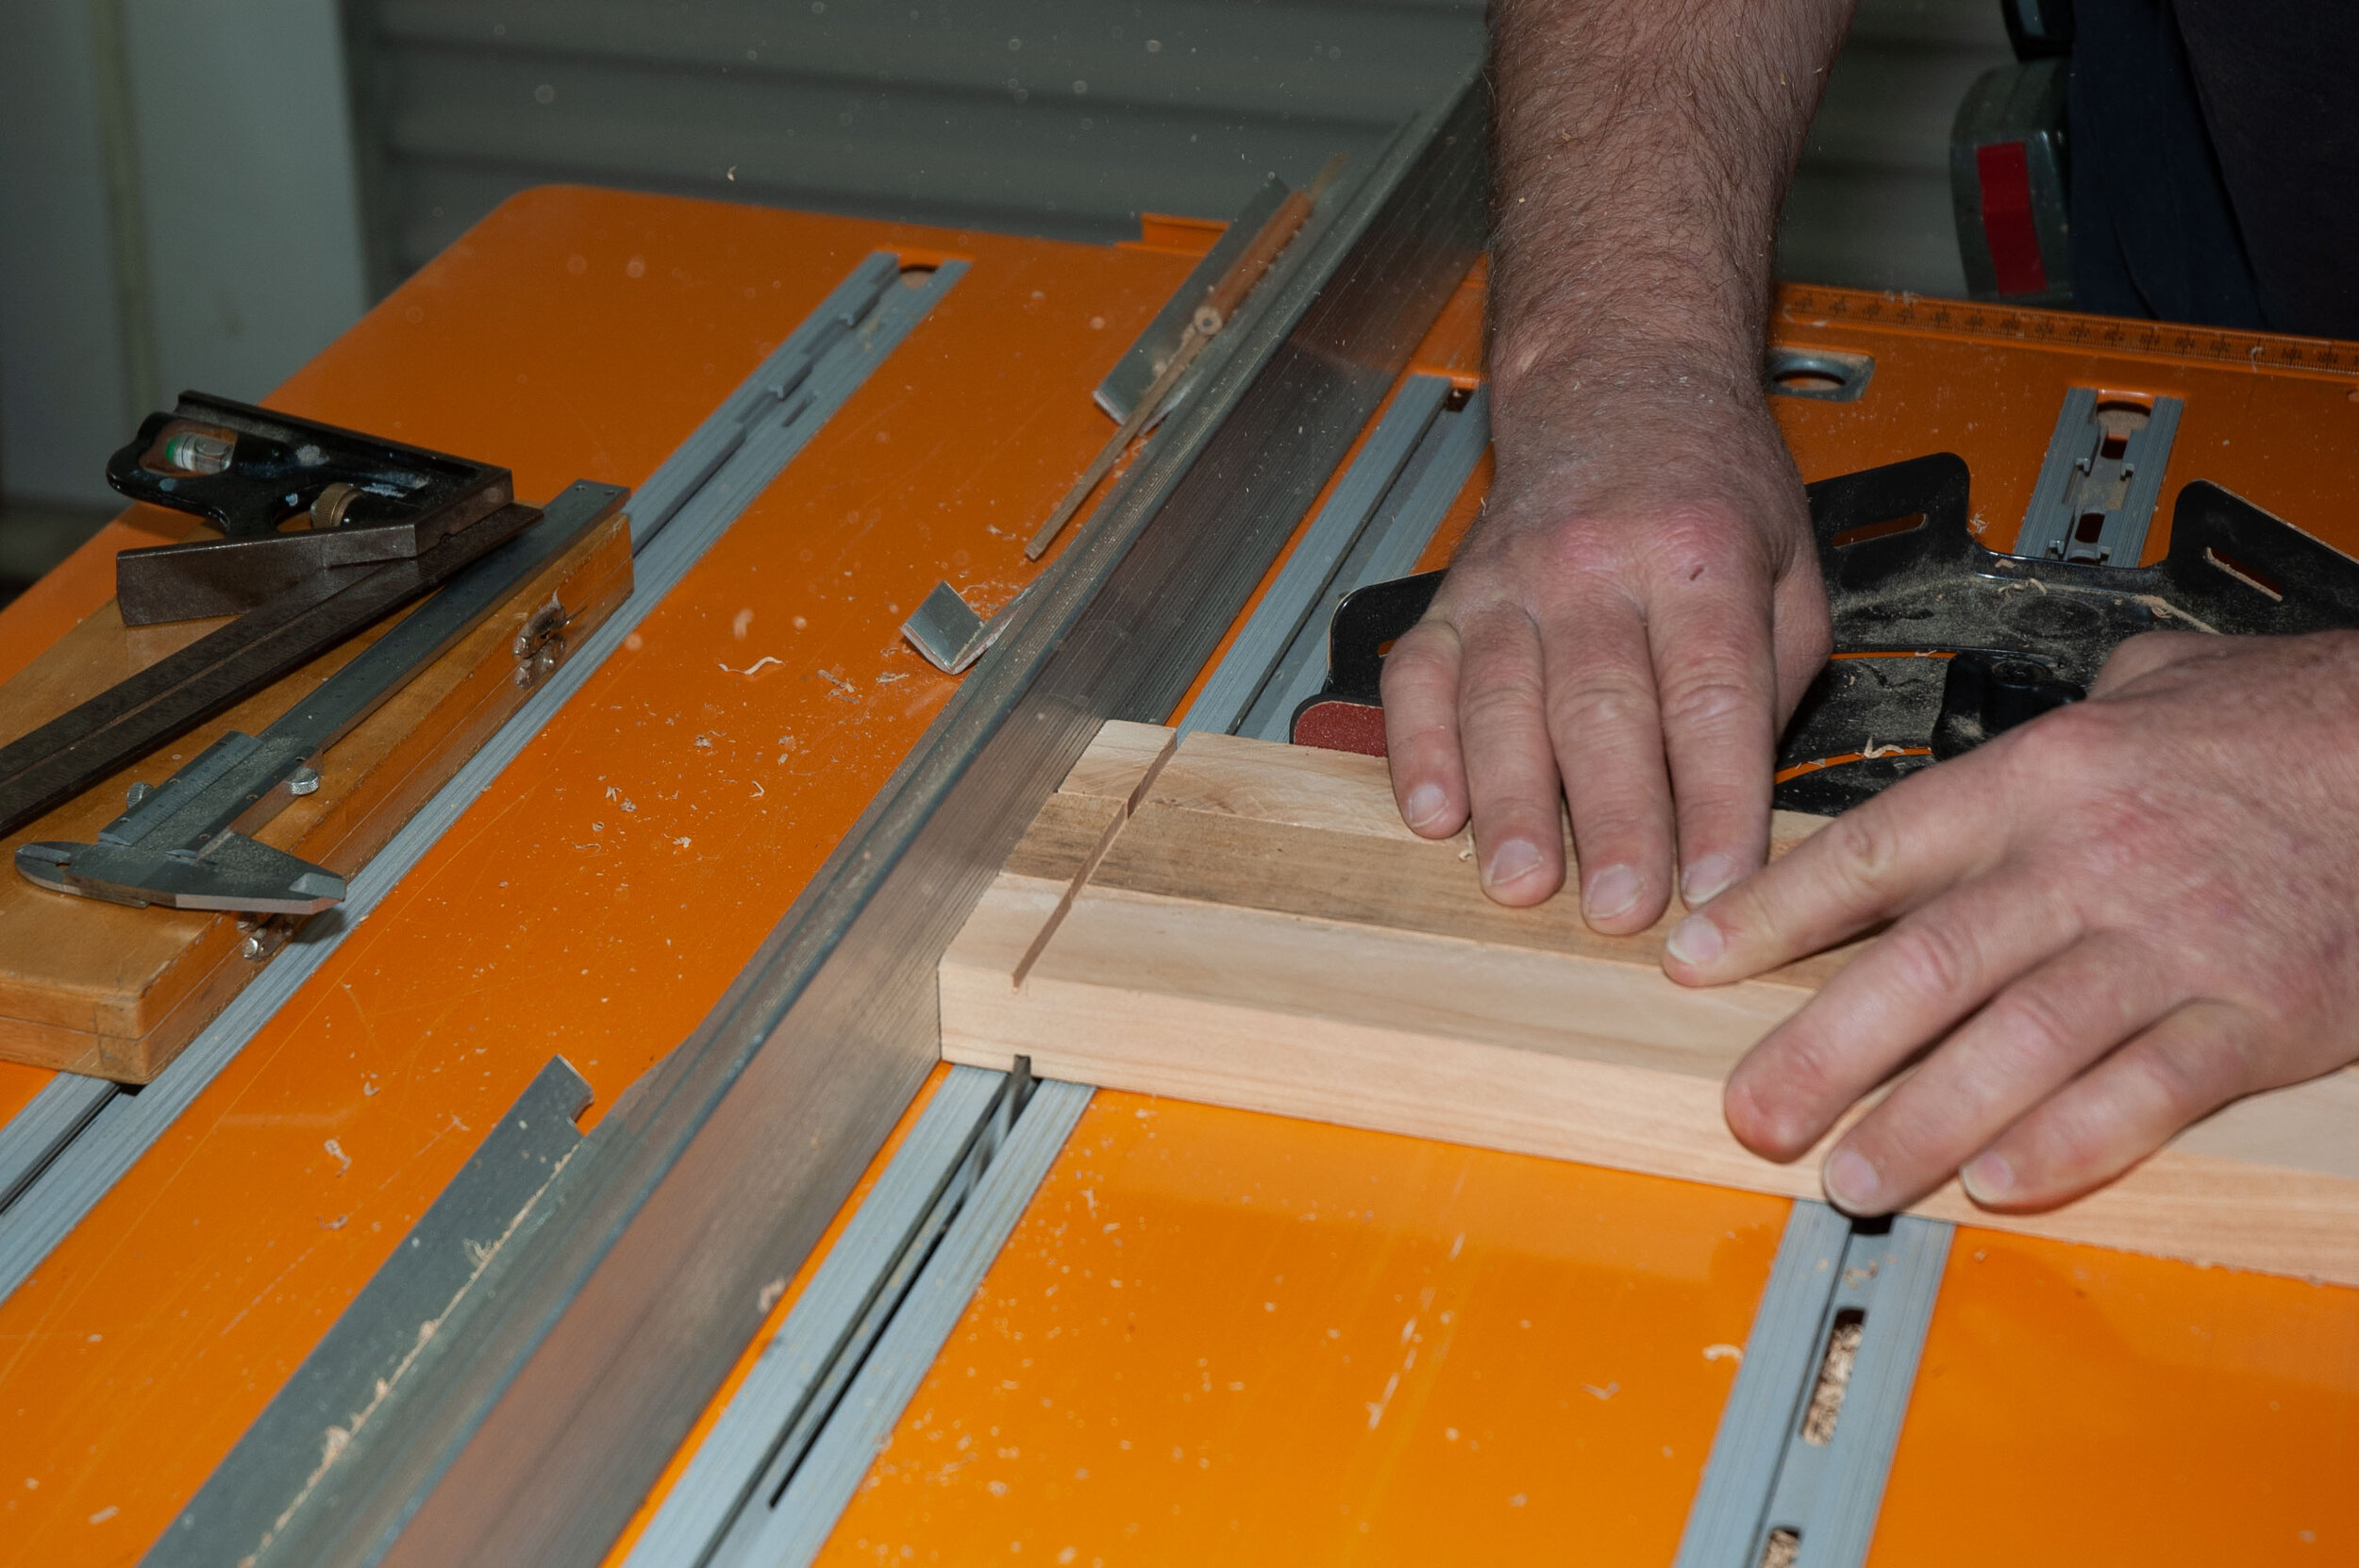 Cutting the tenon shoulders on the table saw